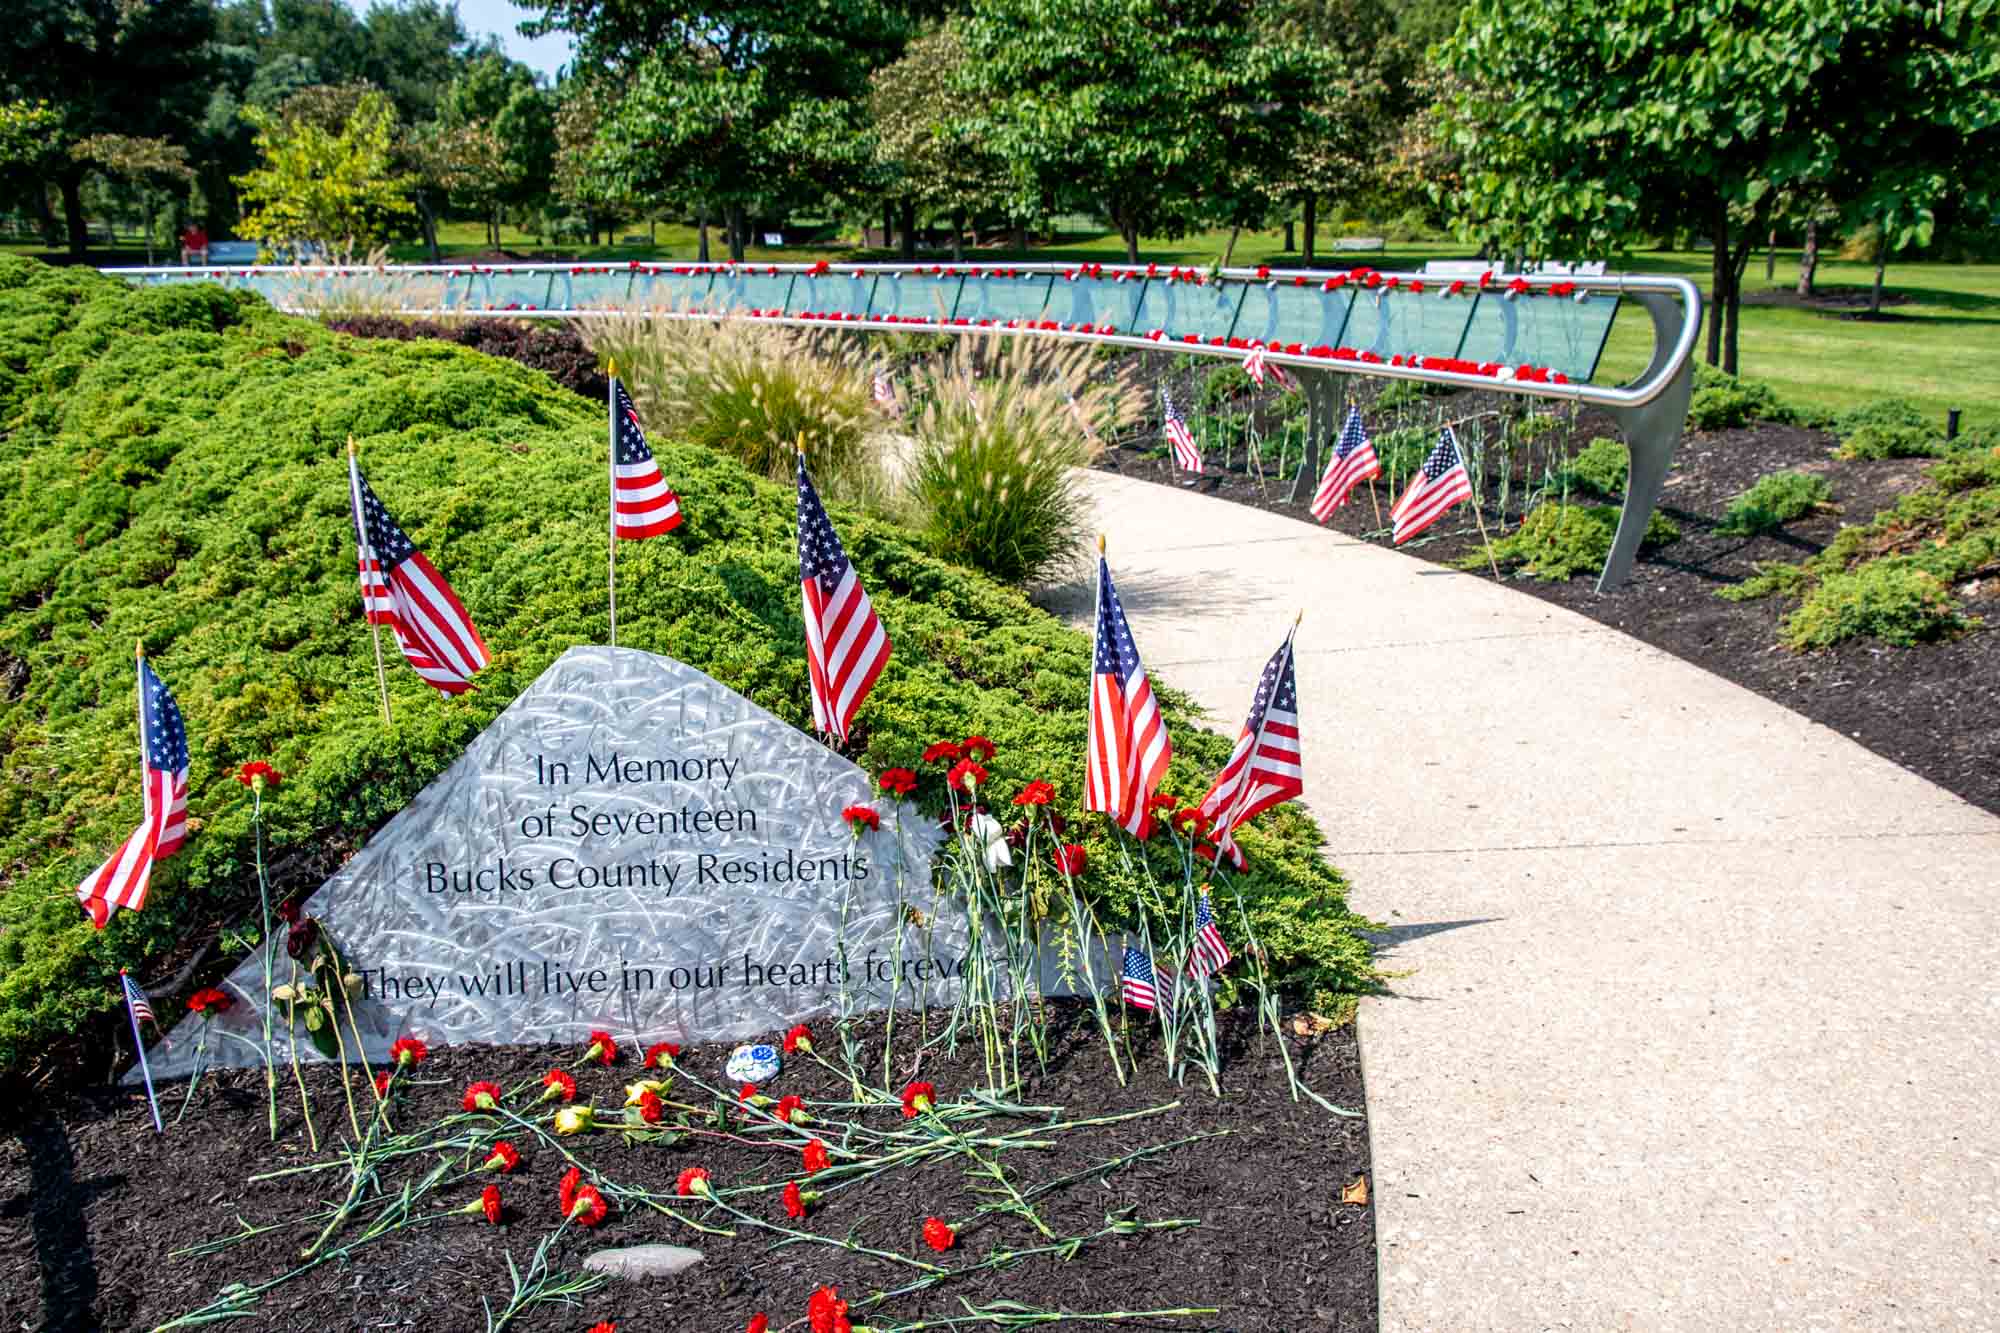 American flags and flowers around a stone slab engraved with: "In Memory of Seventeen Bucks County Residents--They will live in our hearts forever"